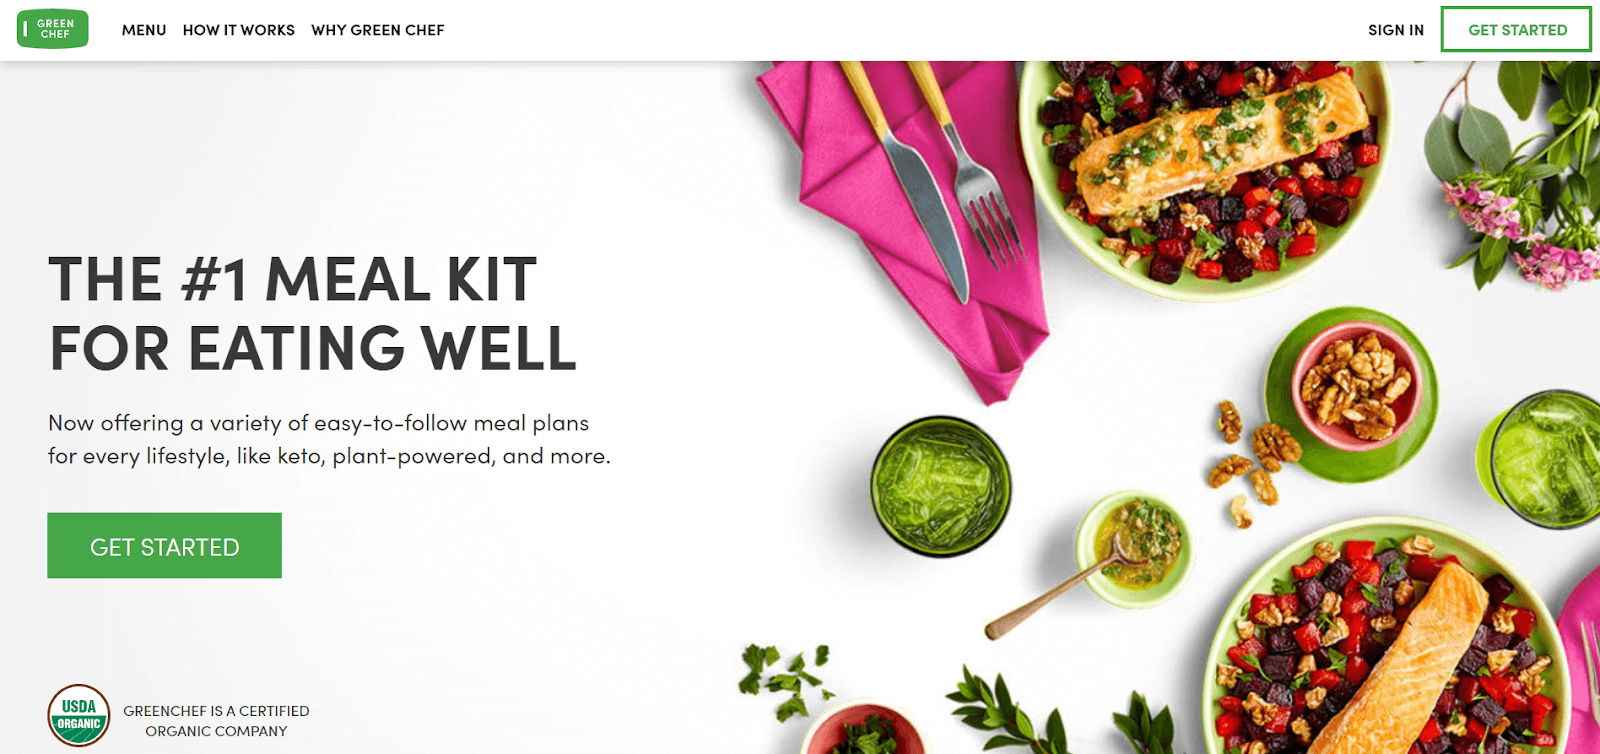 Healthy food delivery service: Green Chef